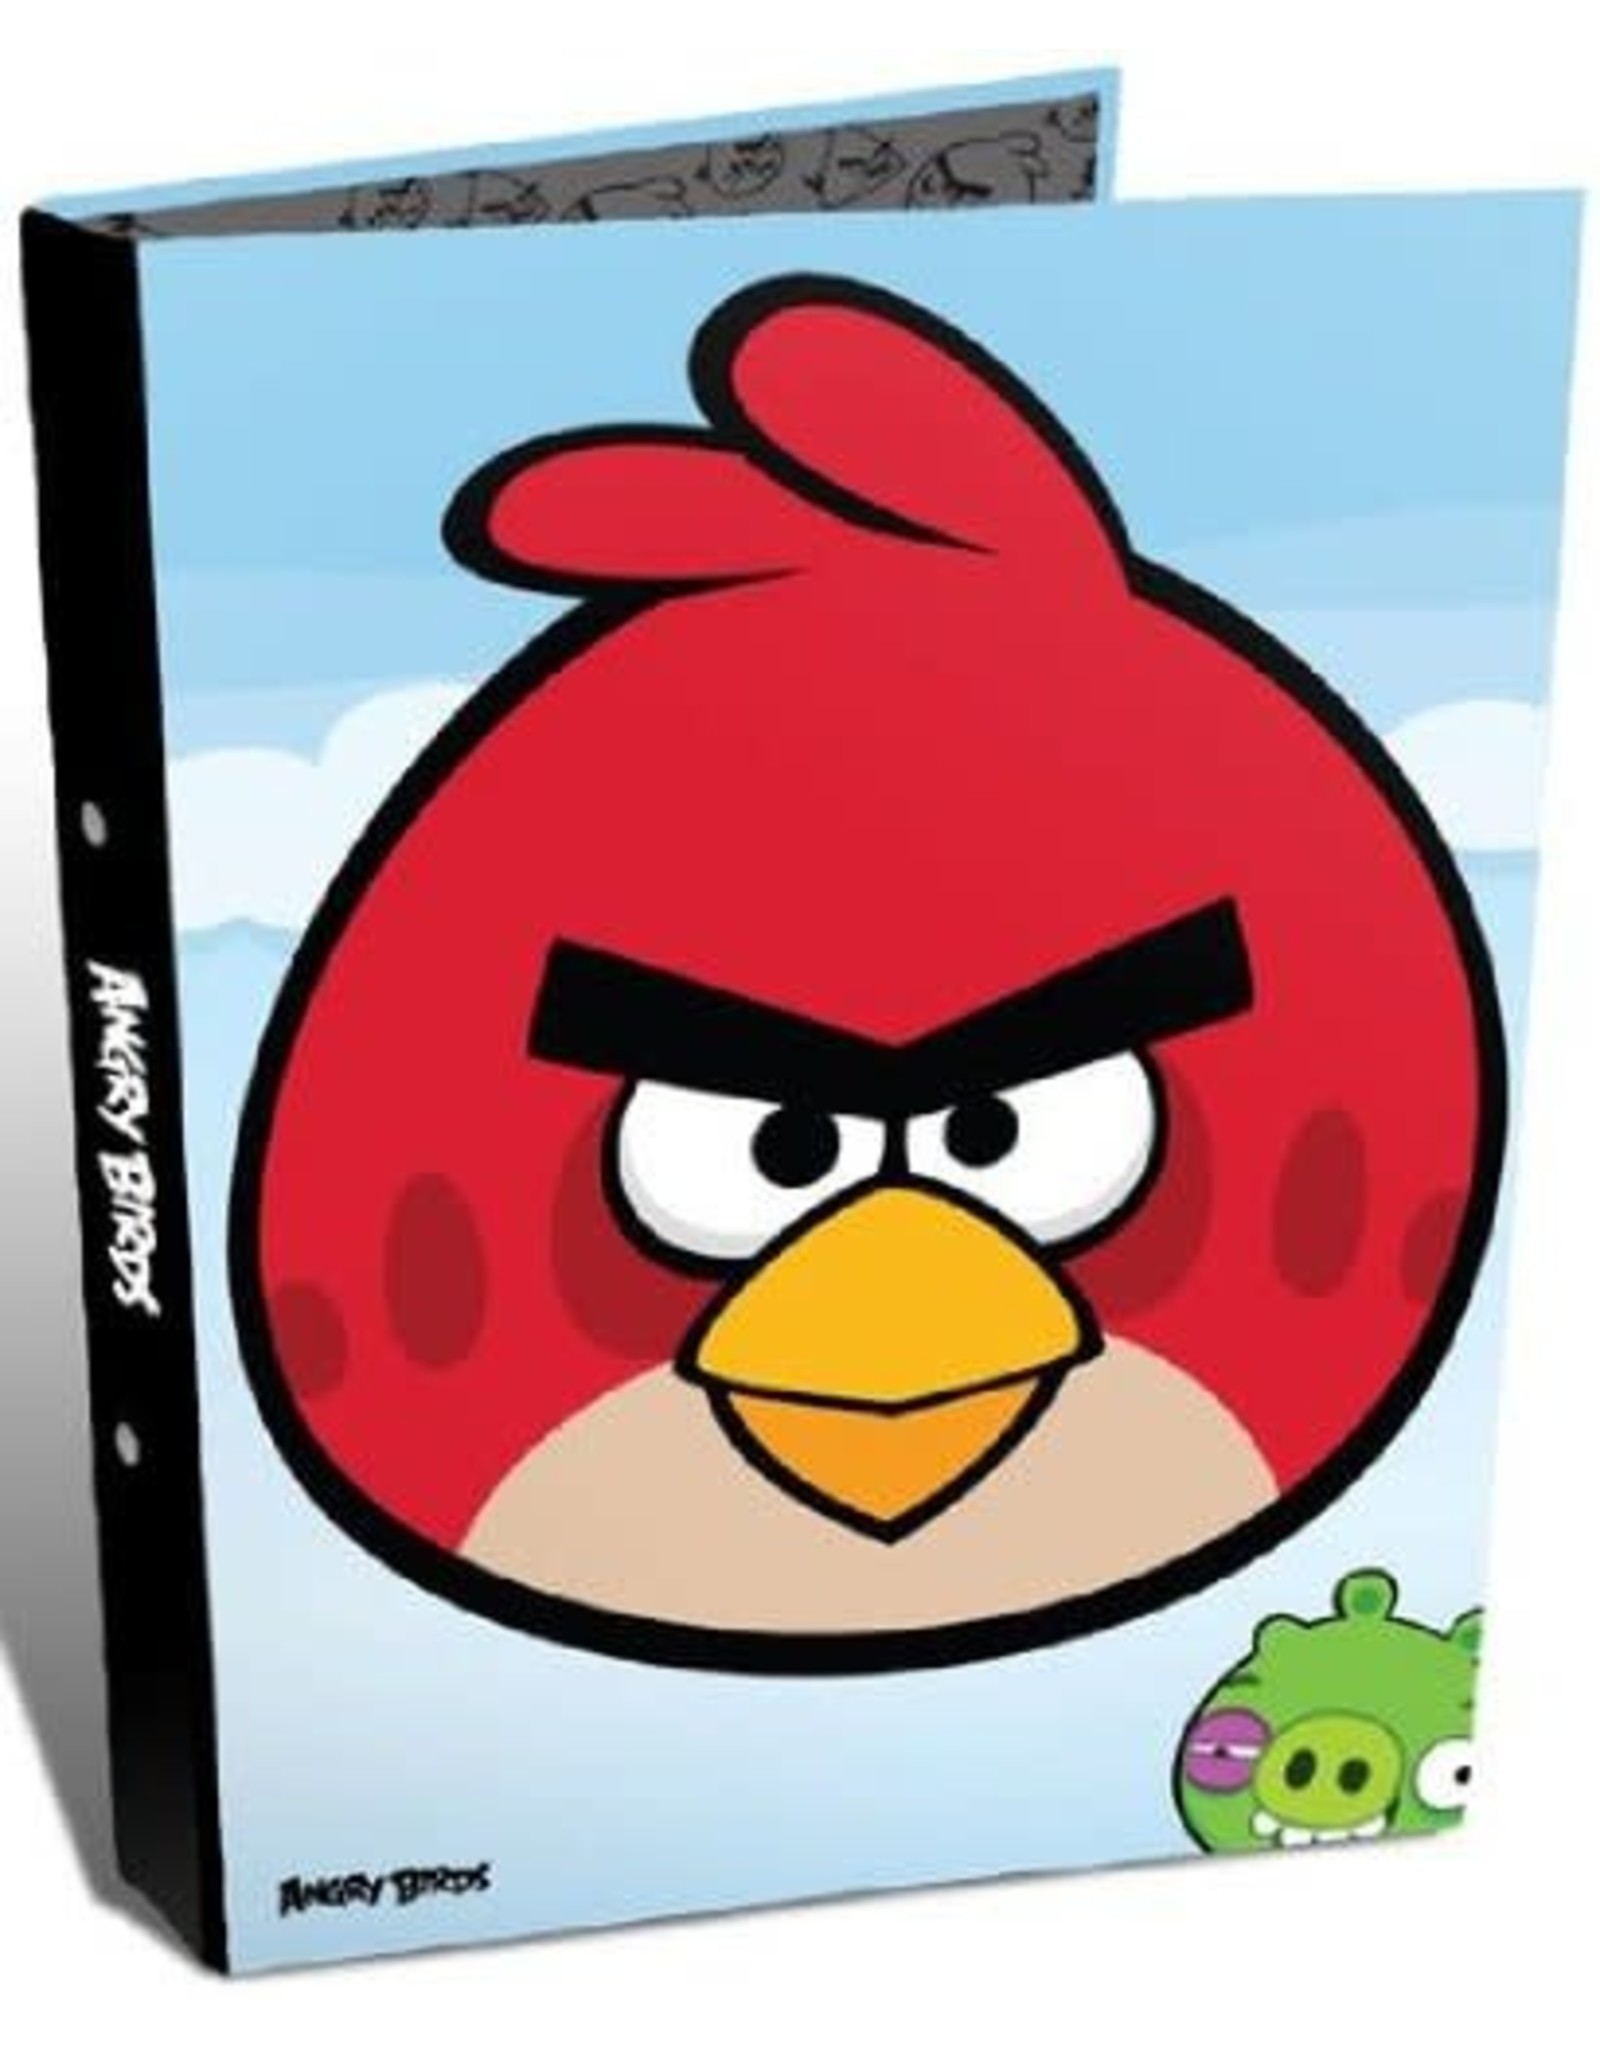 ANGRY BIRDS MAP 2 rings